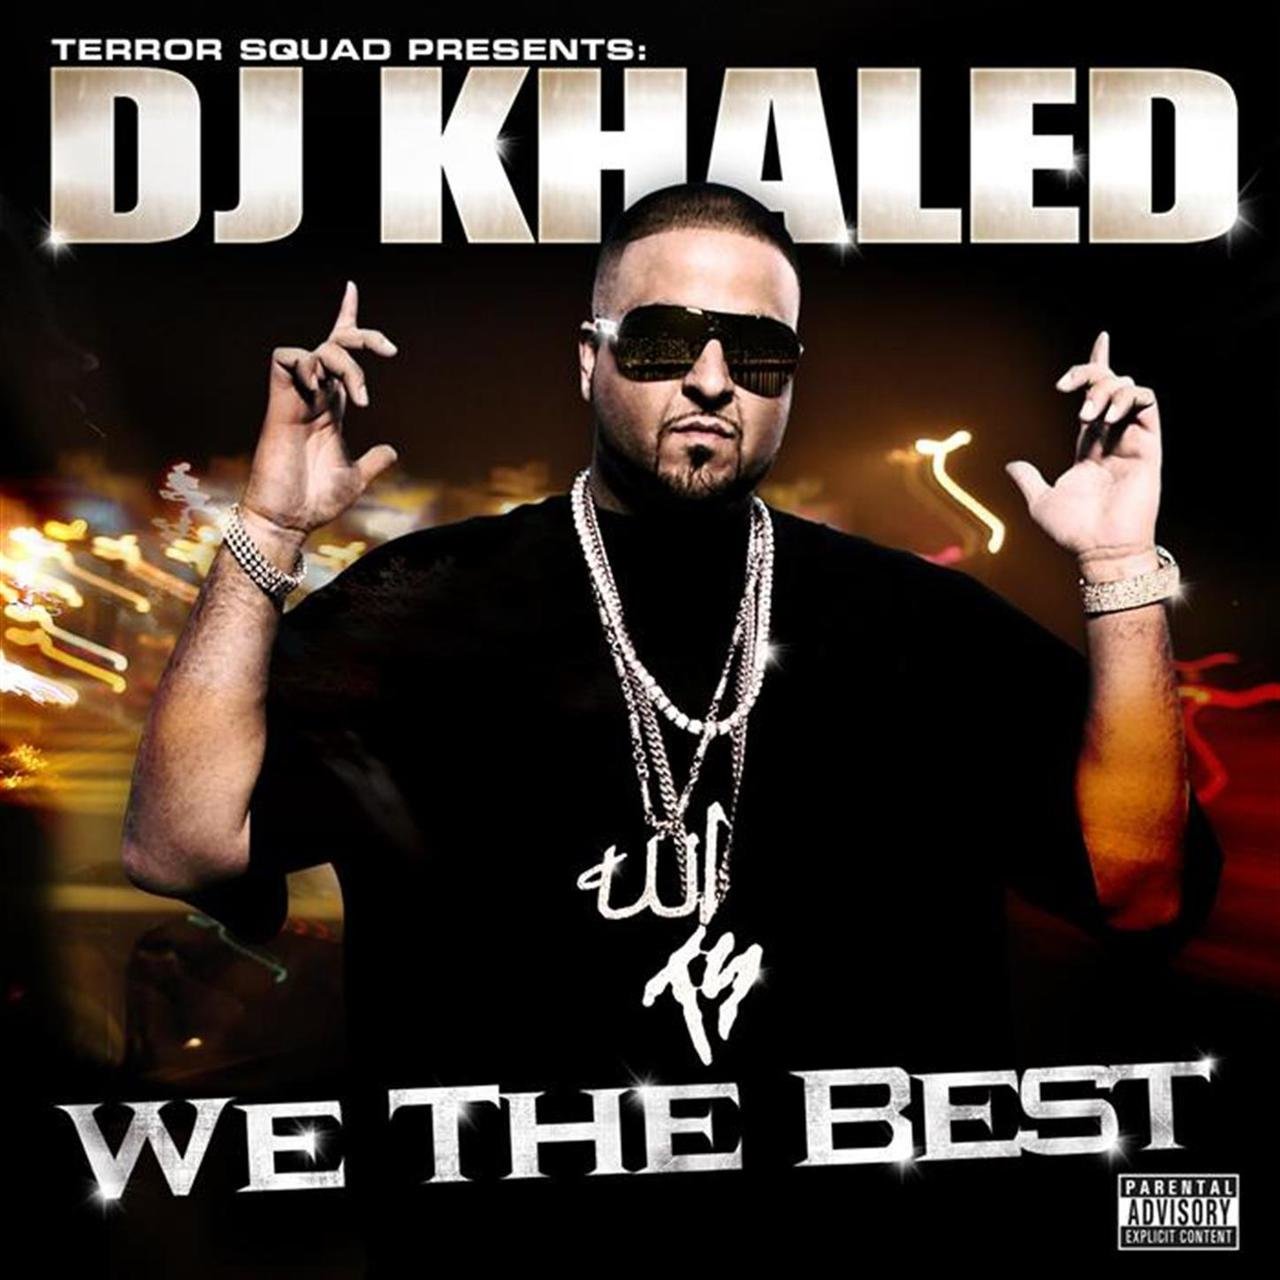 DJ Khaled - We The Best (Cover)